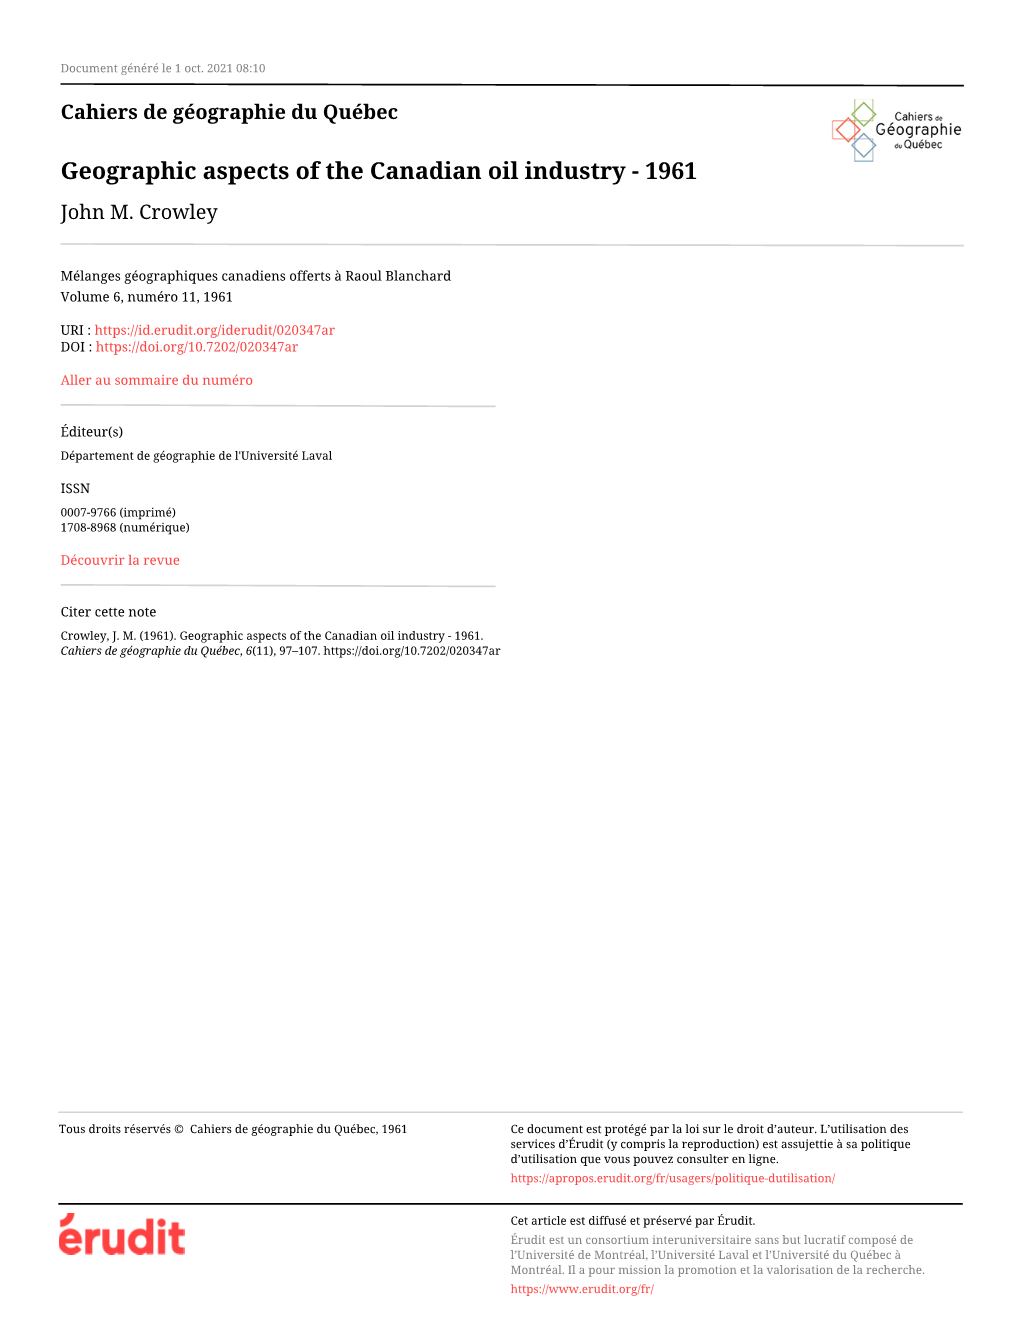 Geographic Aspects of the Canadian Oil Industry - 1961 John M